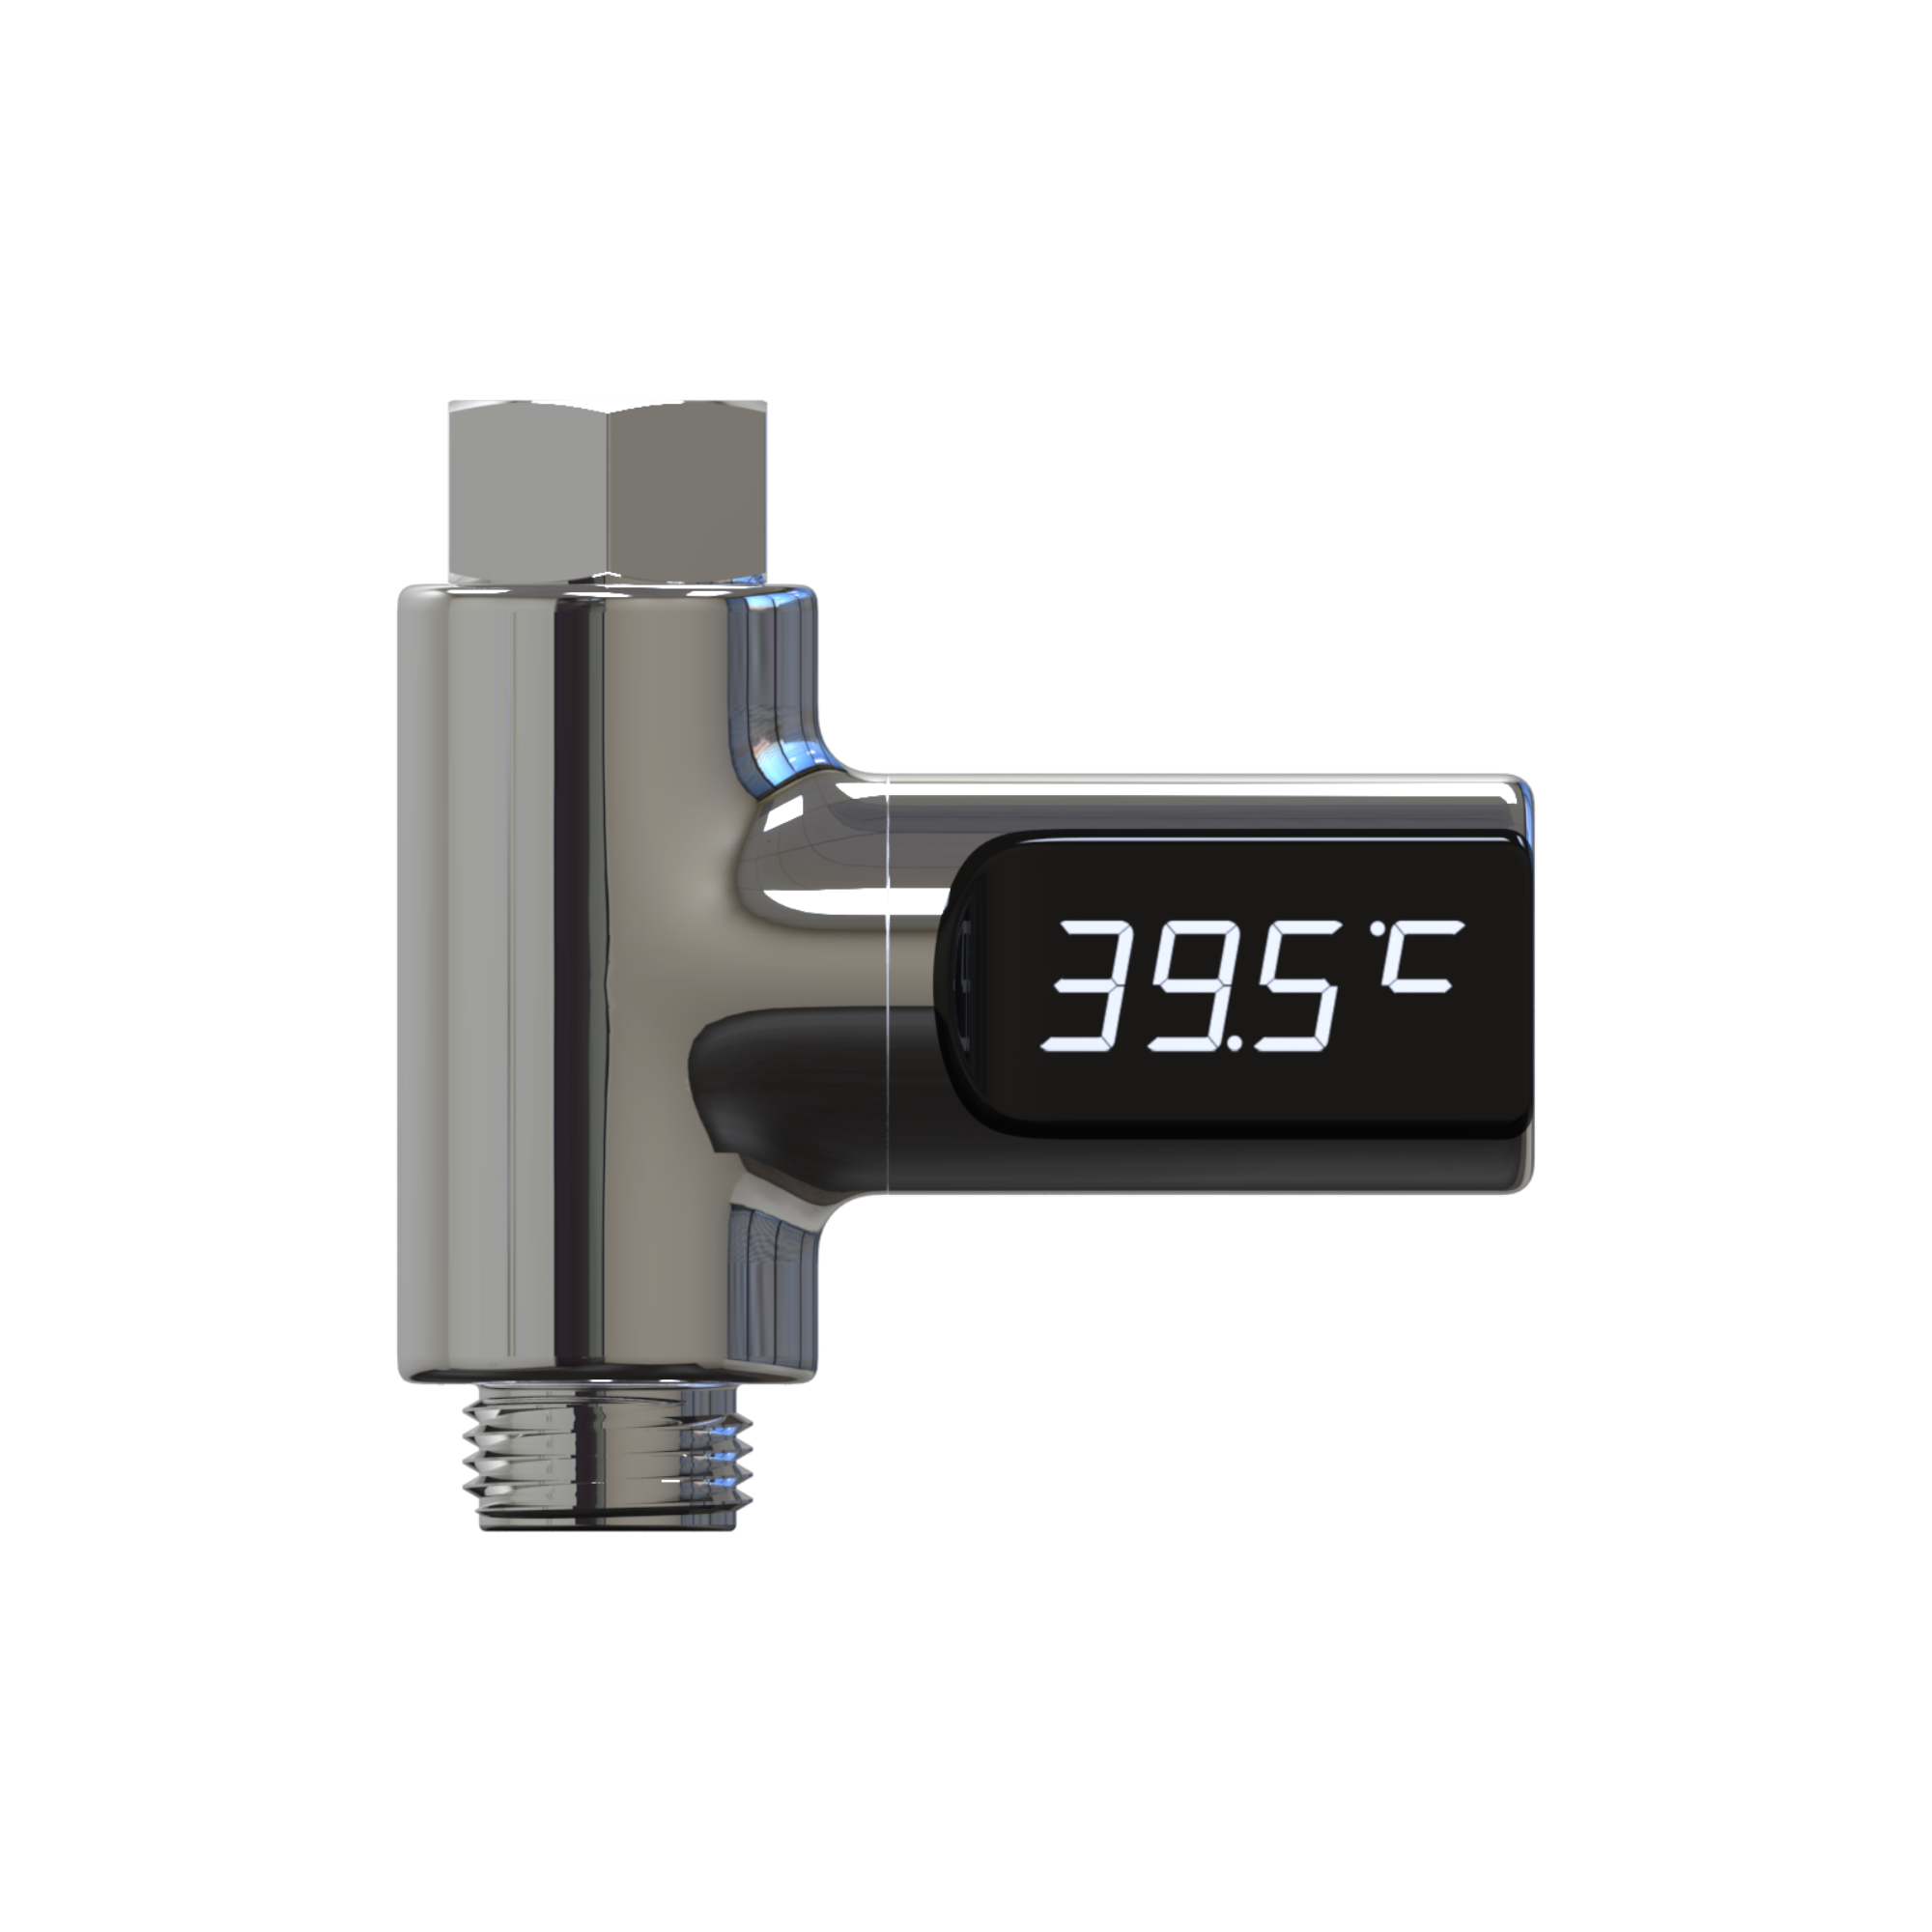 Digitales Dusch-Thermometer + product picture